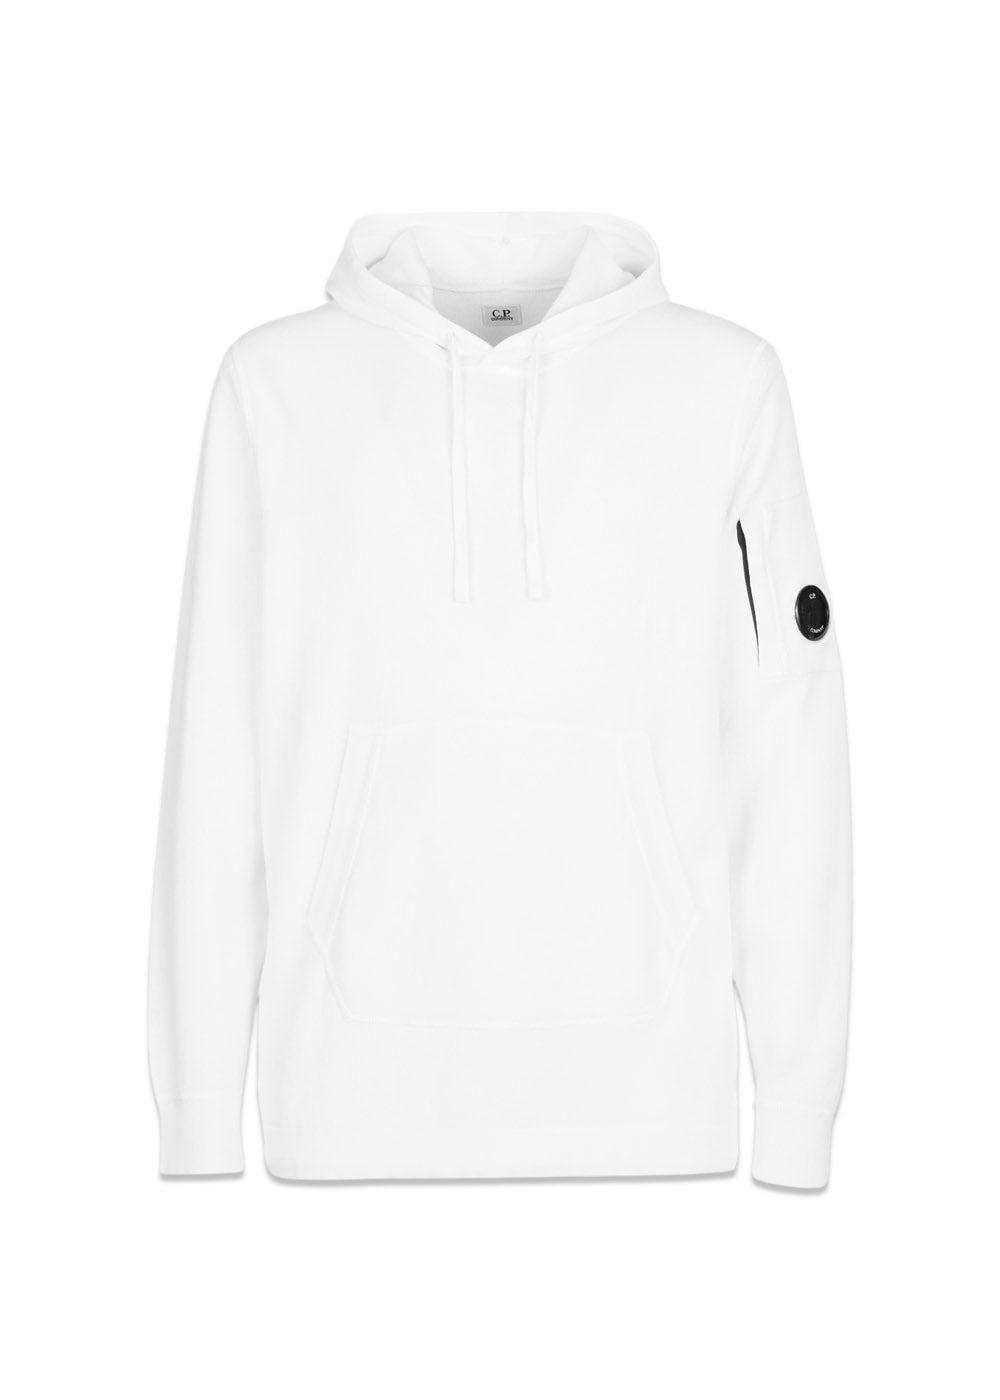 C.P. Companys Hooded Light Terry Knitted - Gauze White. Køb strik her.